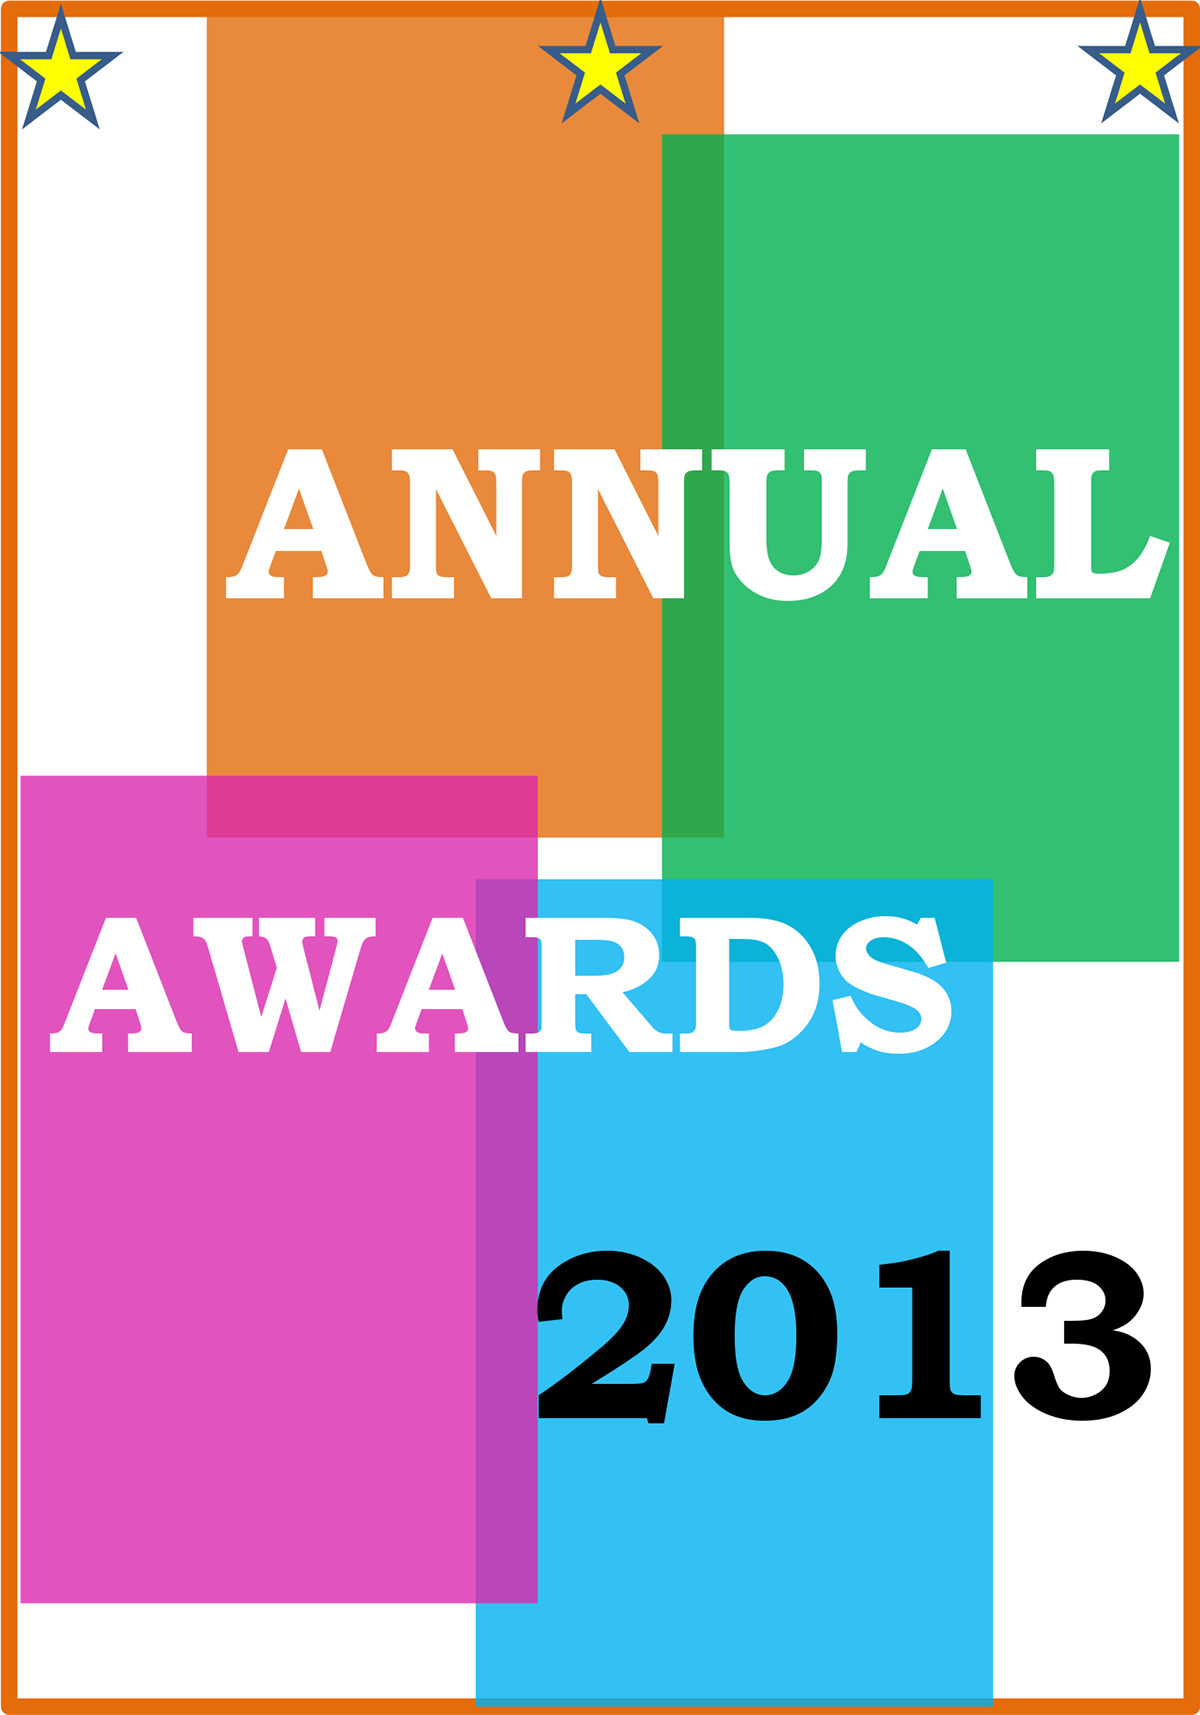 Print Collaterals award posters